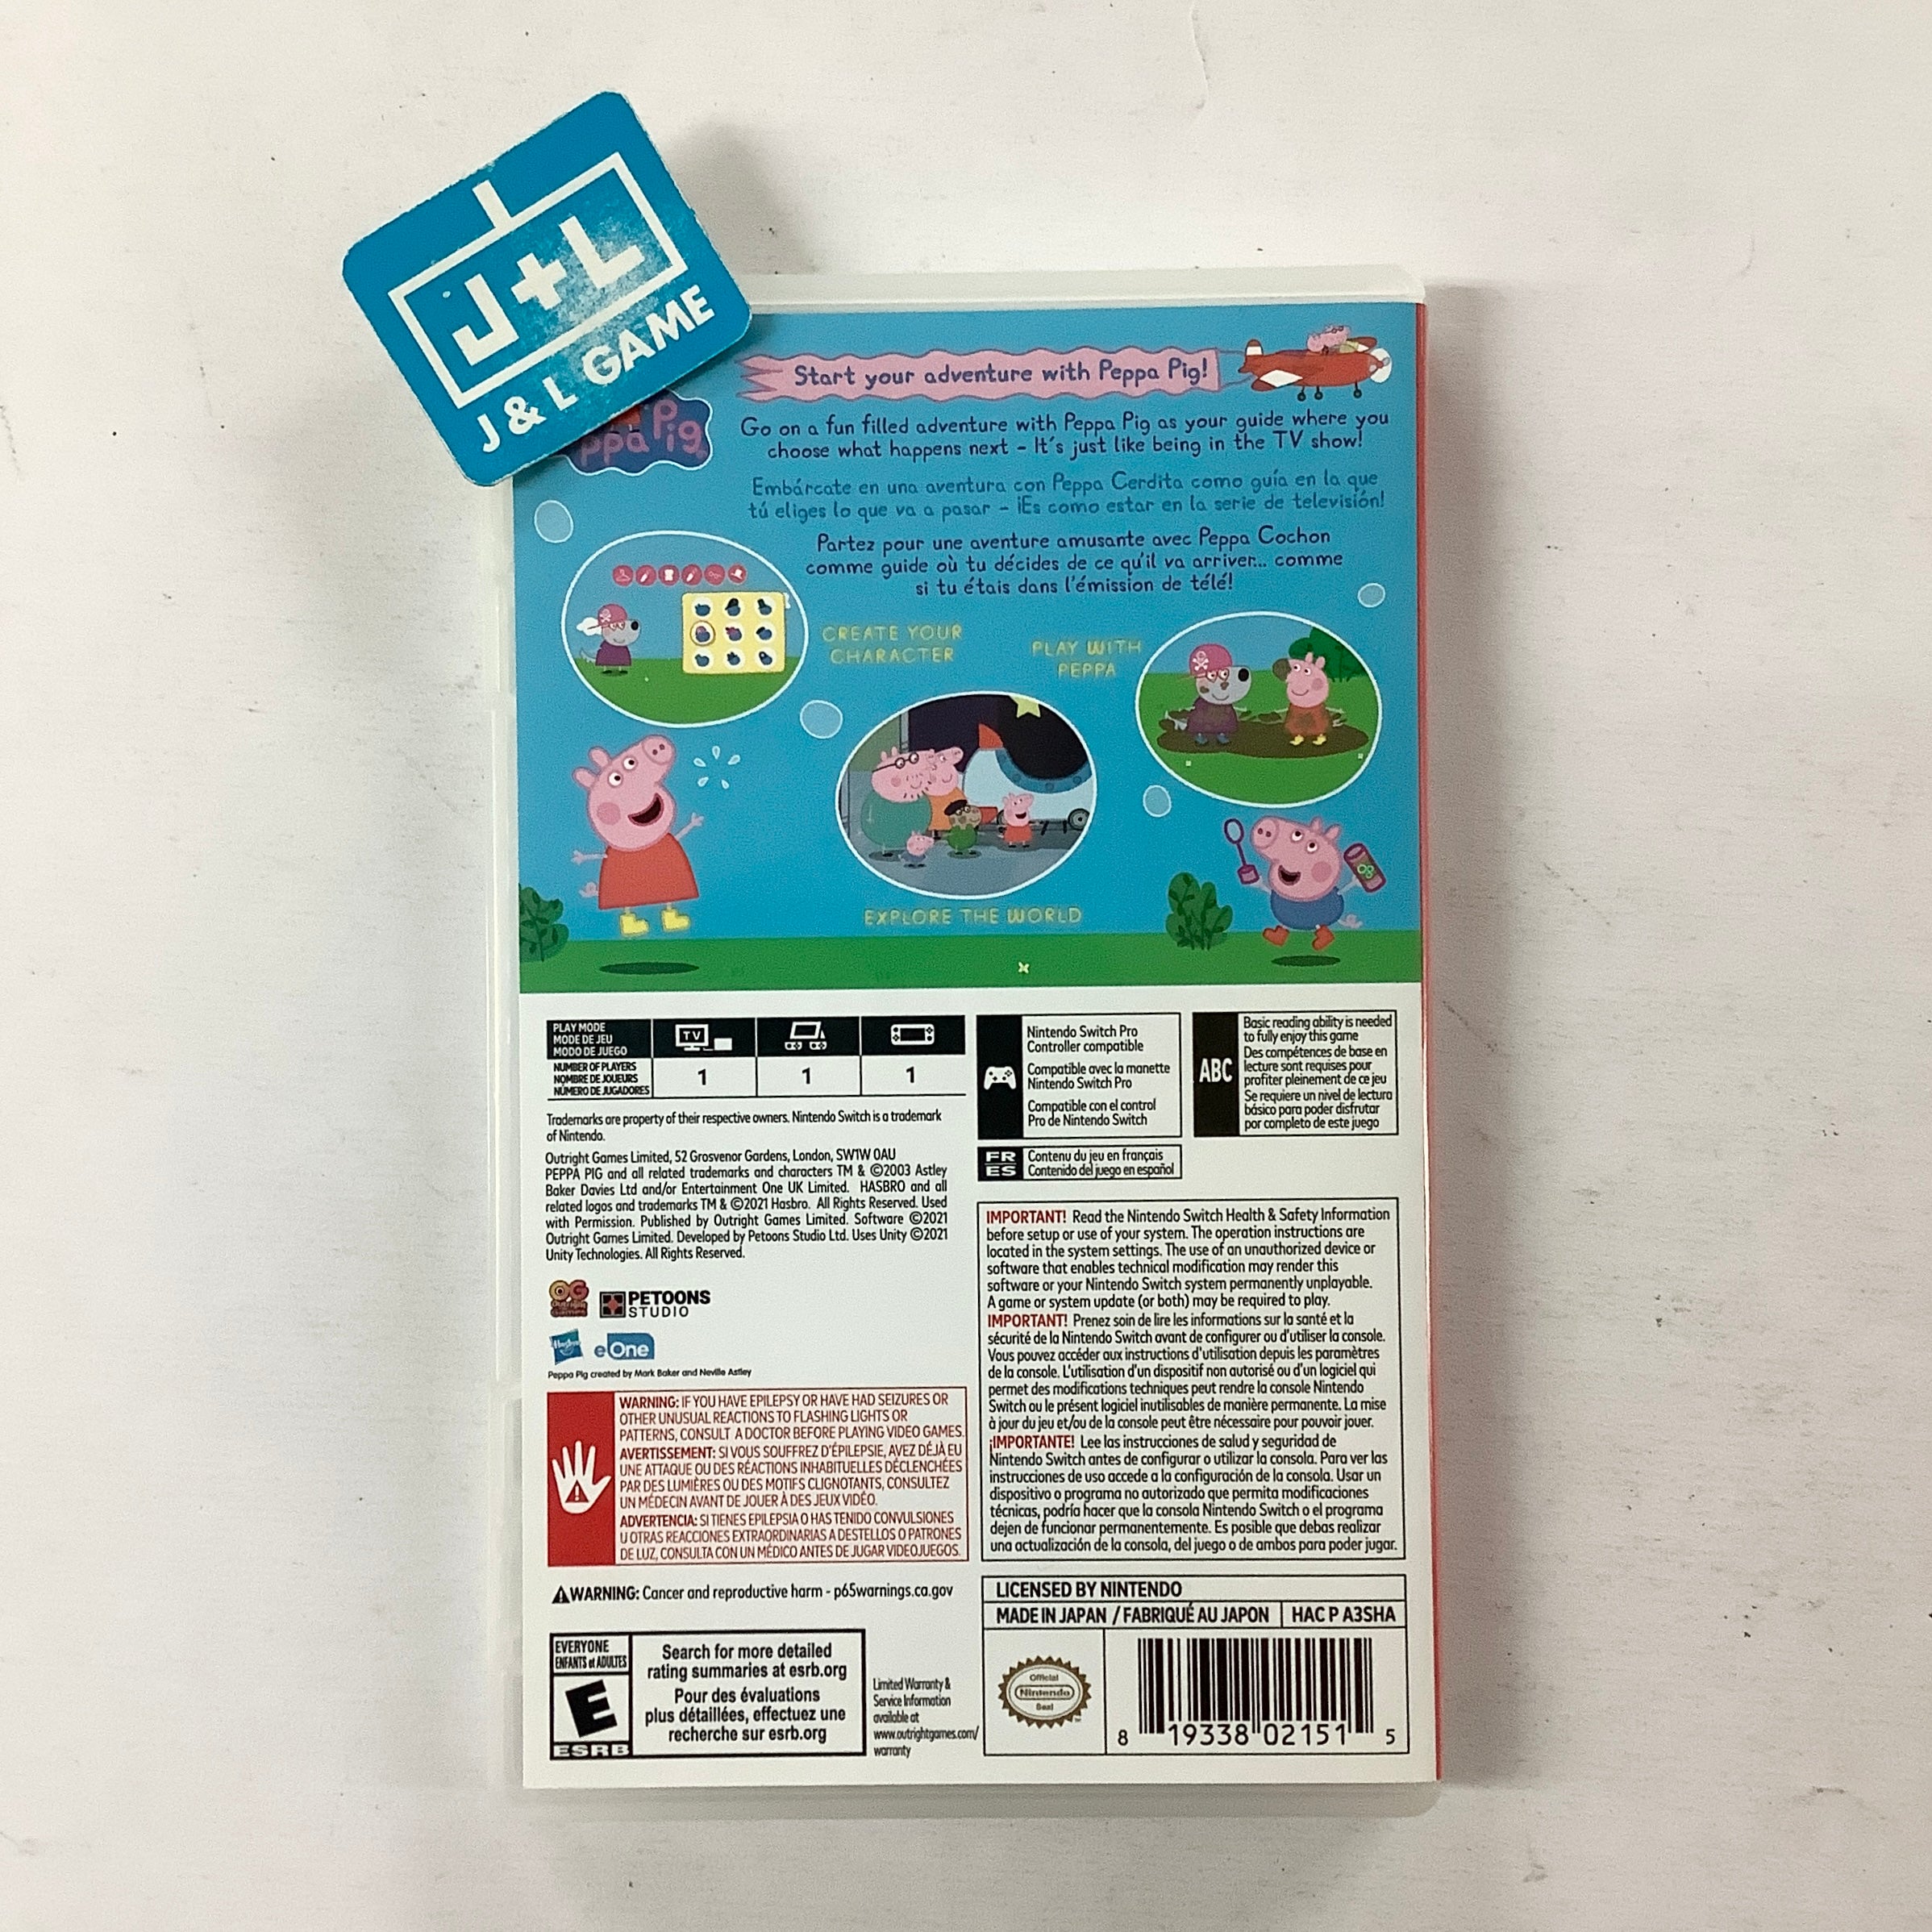 My Friend Peppa Pig - (NSW) Nintendo Switch [UNBOXING] Video Games Outright Games   